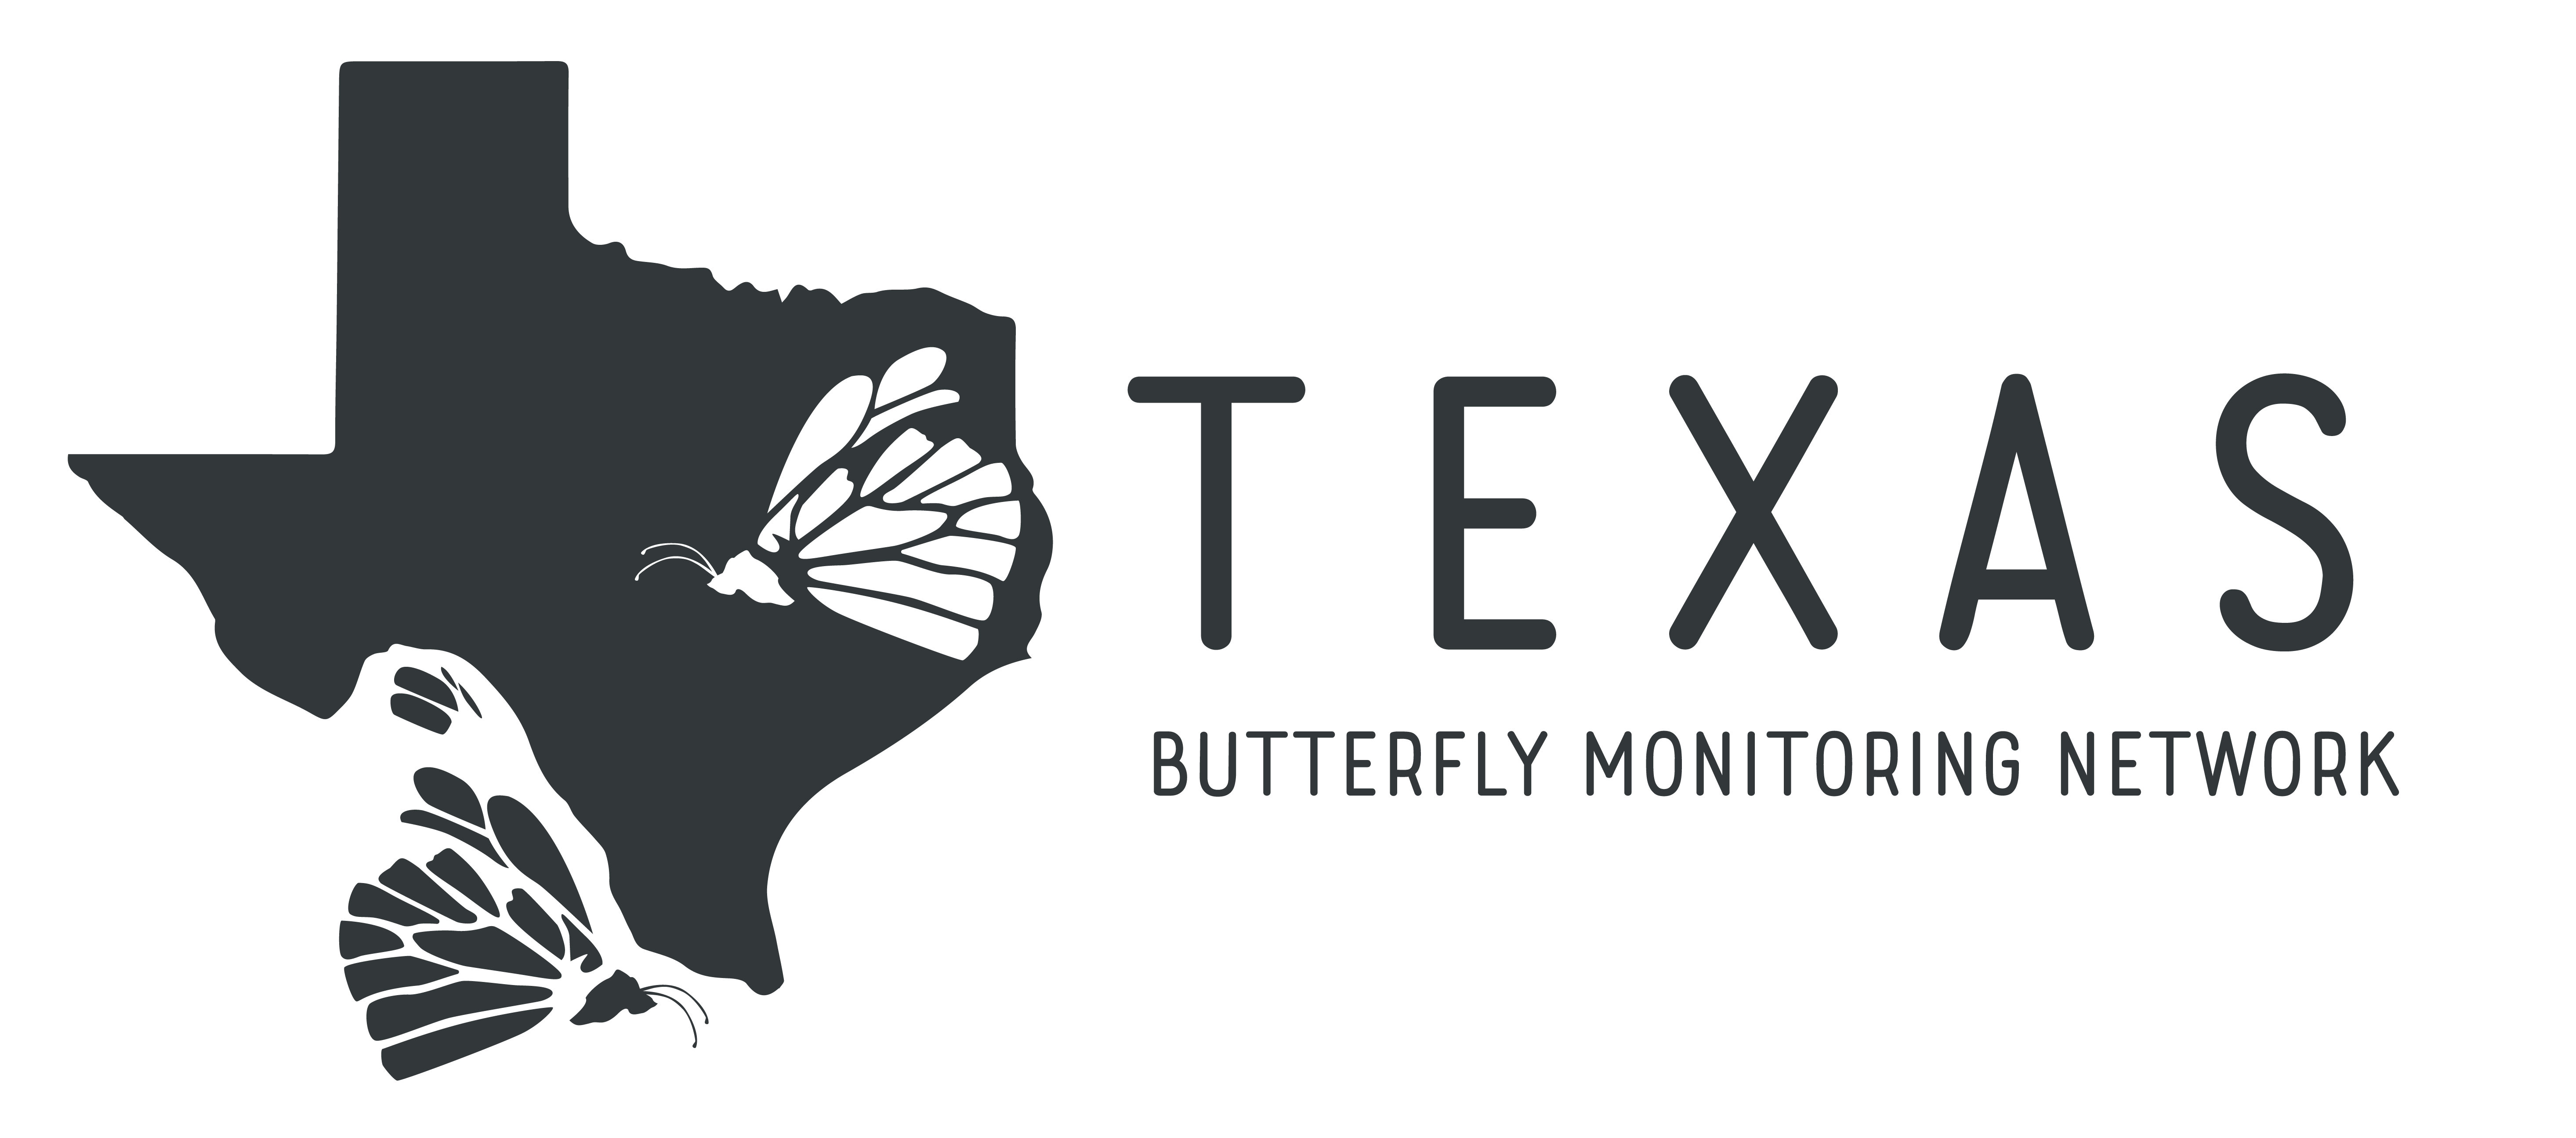 The Texas Butterfly Monitoring Network Logo